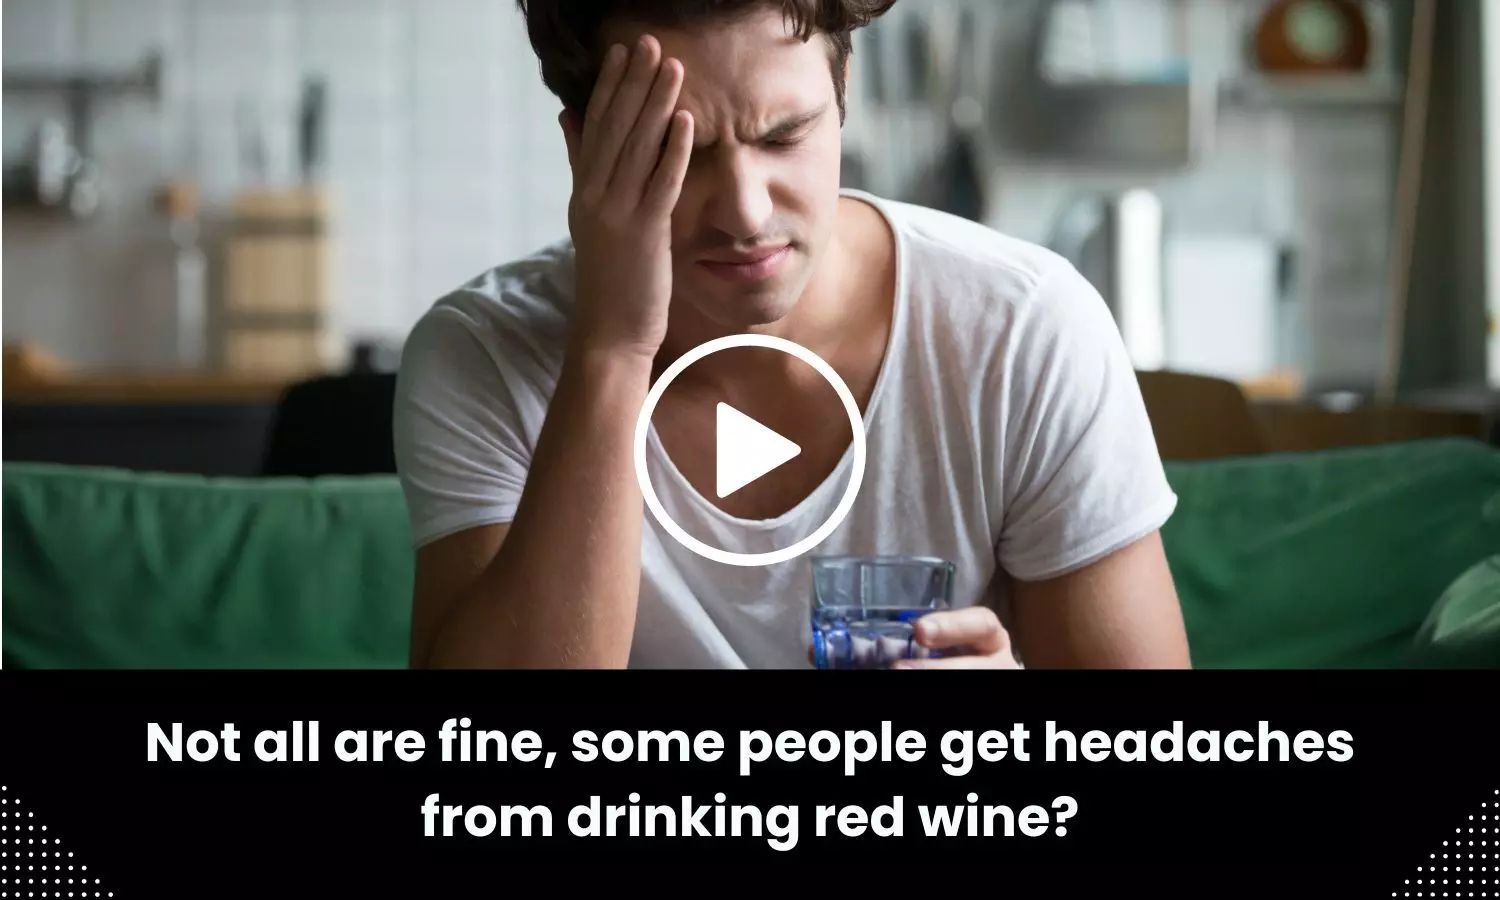 Not all are fine, some people get headaches from drinking red wine?